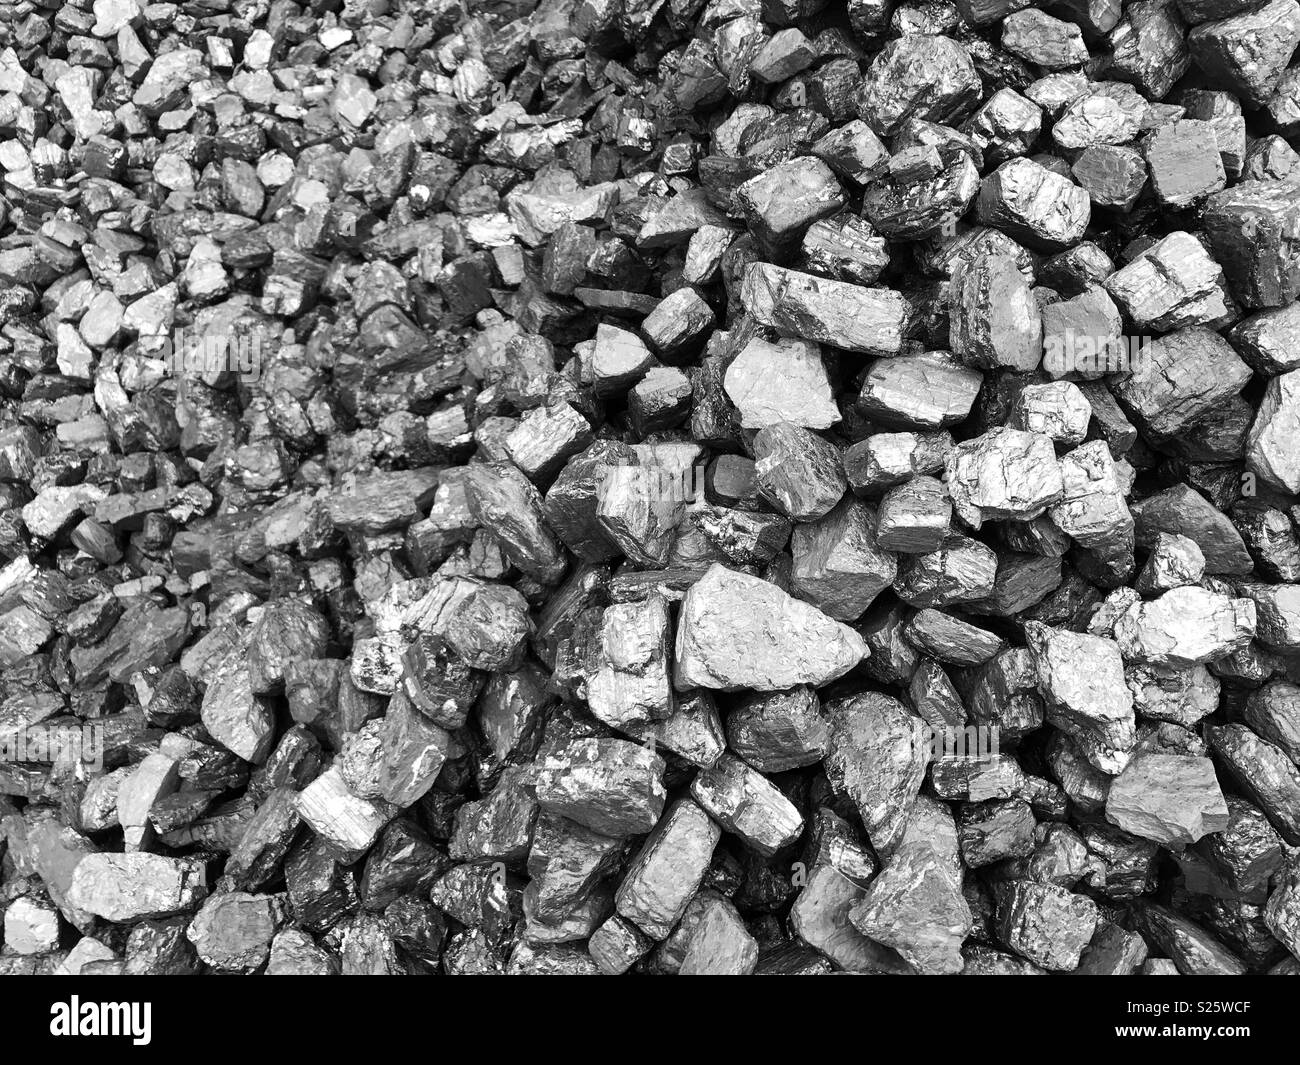 A pile of coal. Lumps of coal, a fossil fuel used to generate heat and electricity. Stock Photo